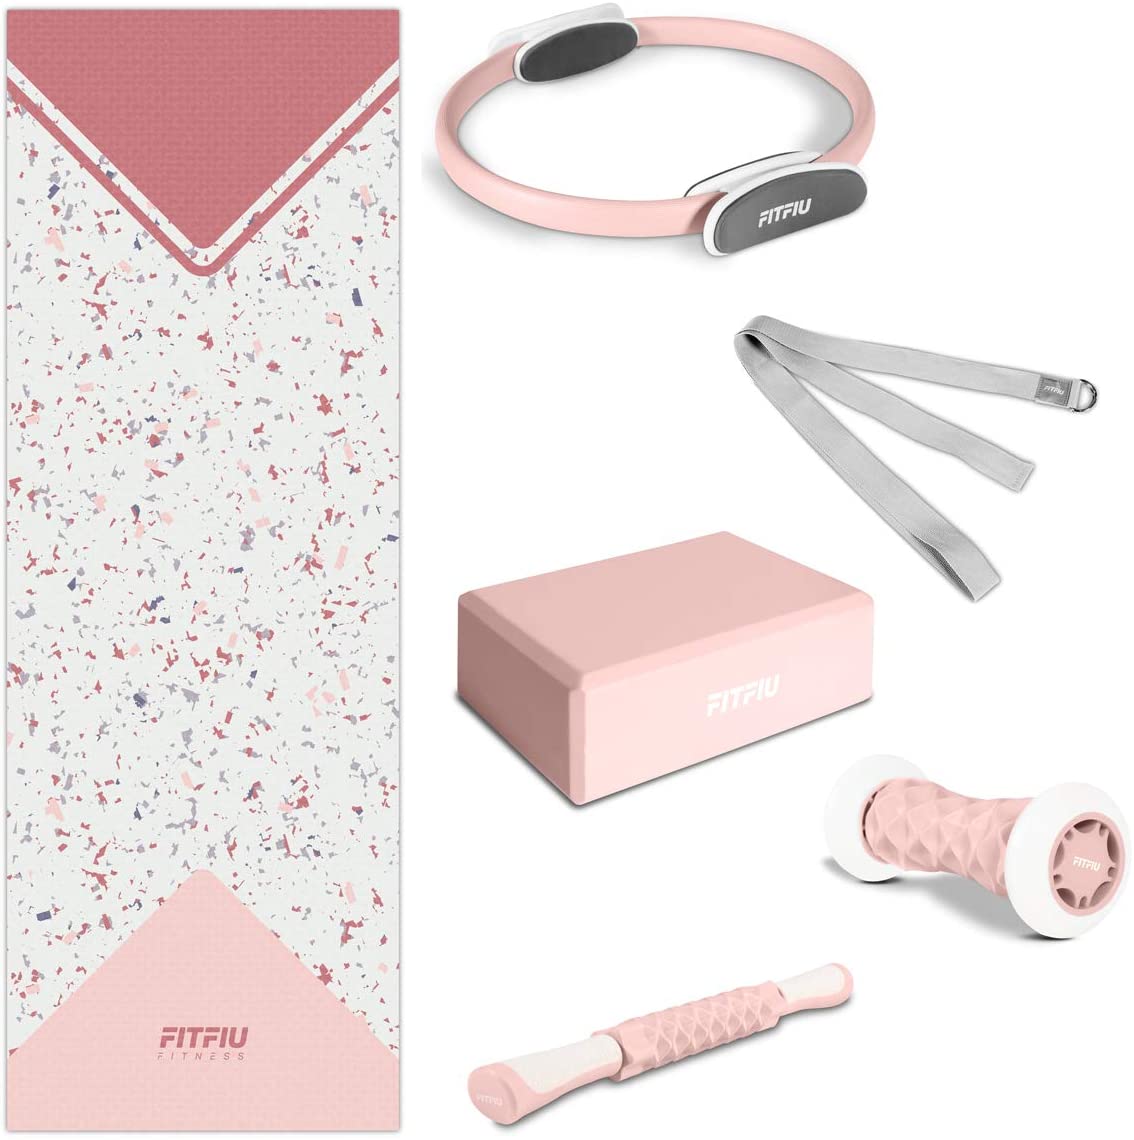 Fitness KITWELL-601 - Kit 6 Yoga and Pilates accessories pink color that includes mat, hoop, block, foot massager, massage bar and yoga strap